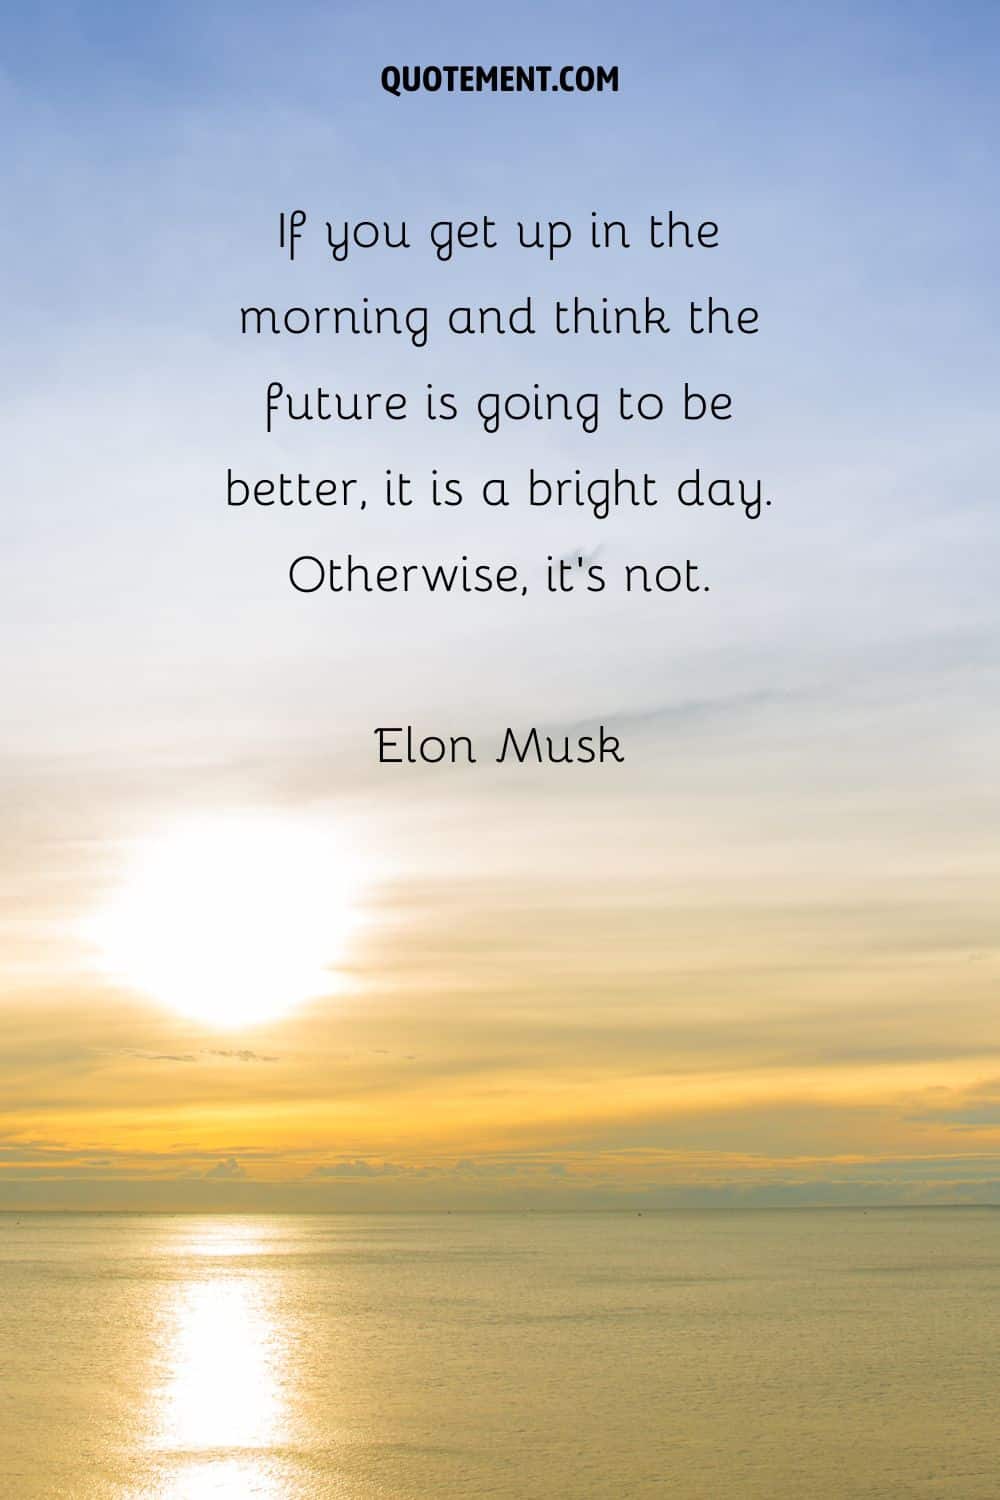 “If you get up in the morning and think the future is going to be better, it is a bright day. Otherwise, it’s not.” — Elon Musk